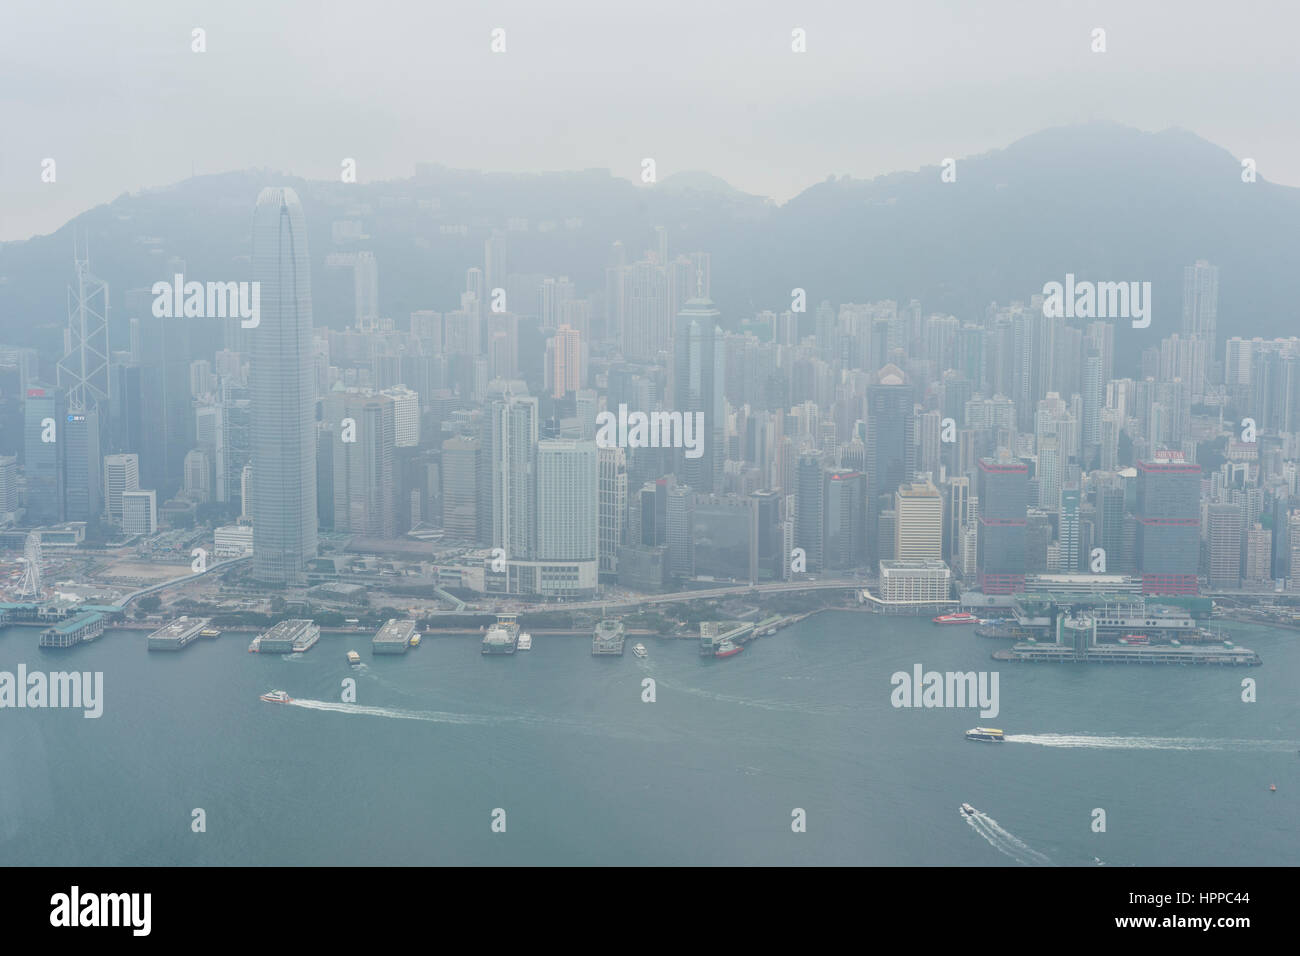 panoramic view of Hong Kong from the International Commerce Center skyscraper in a cloudy day. Stock Photo